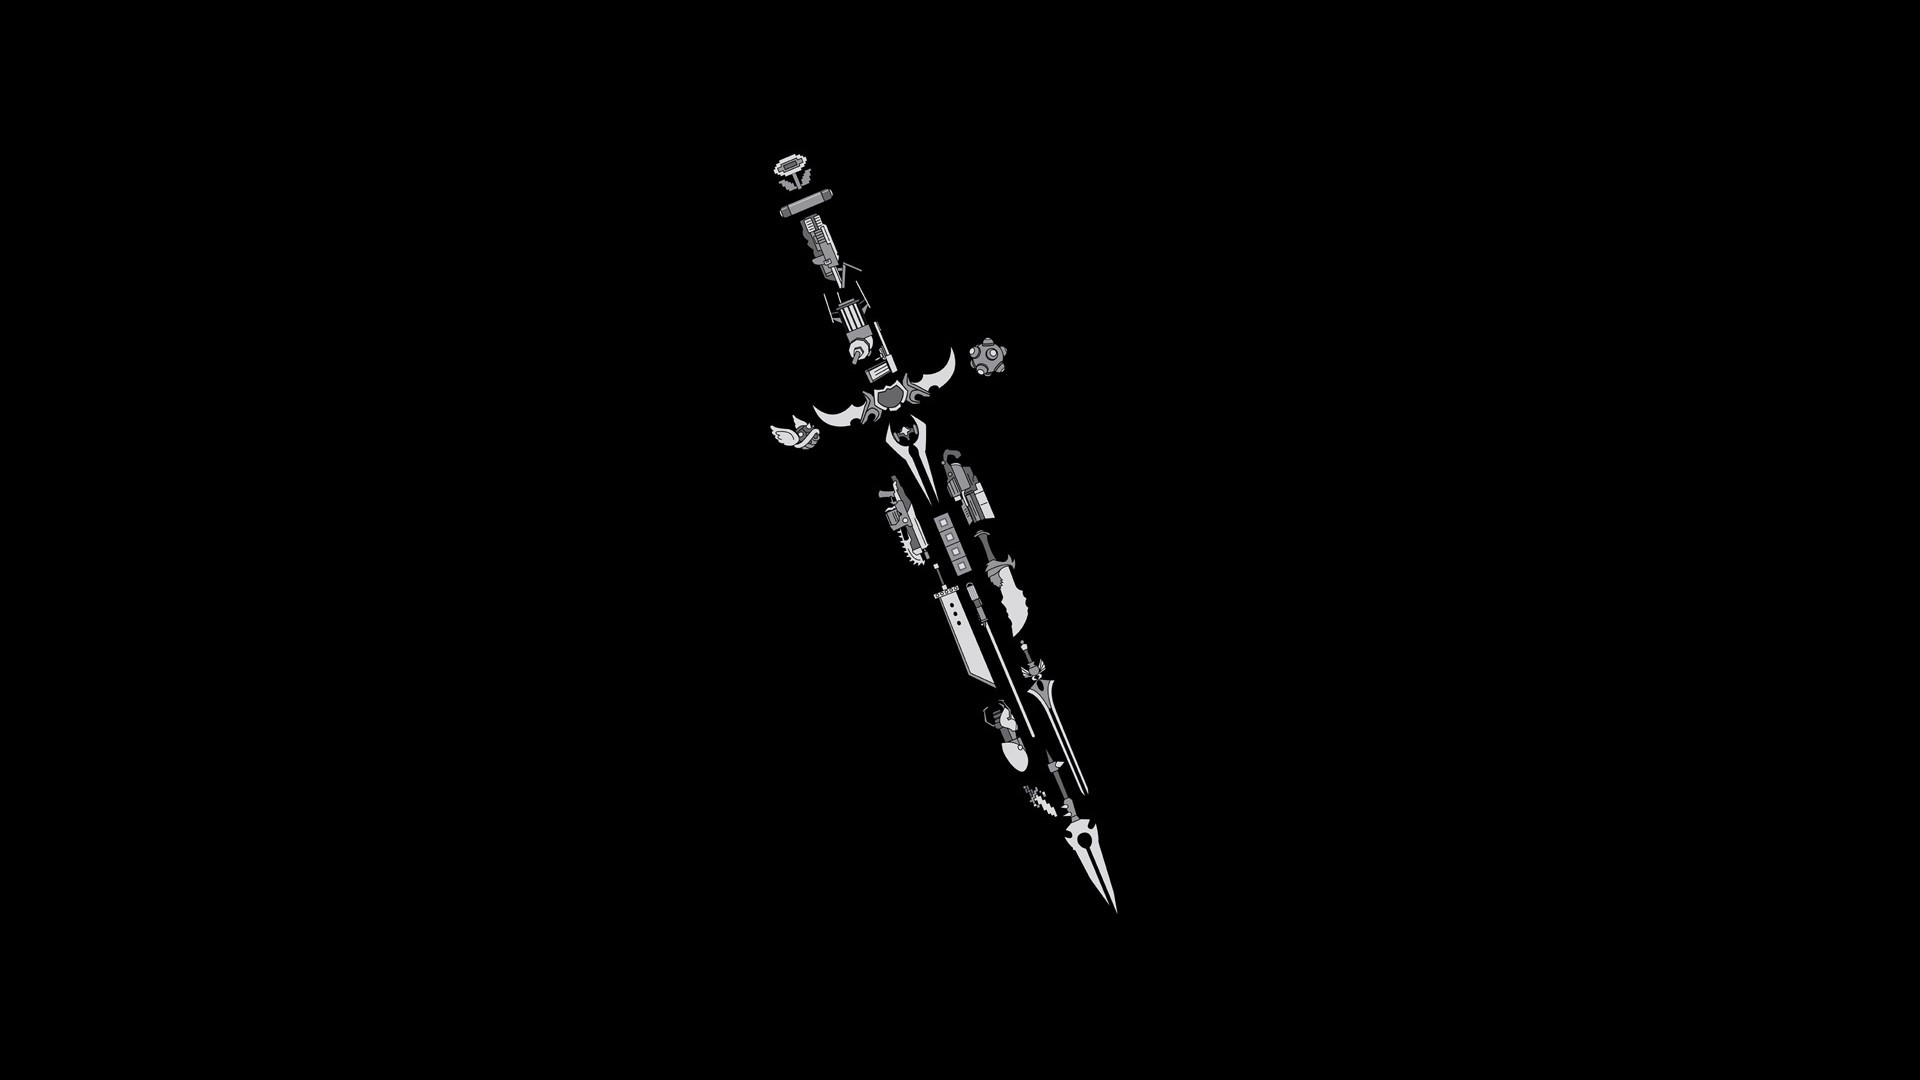 weapon, Fantasy Weapons, Minimalism, Video Games Wallpaper